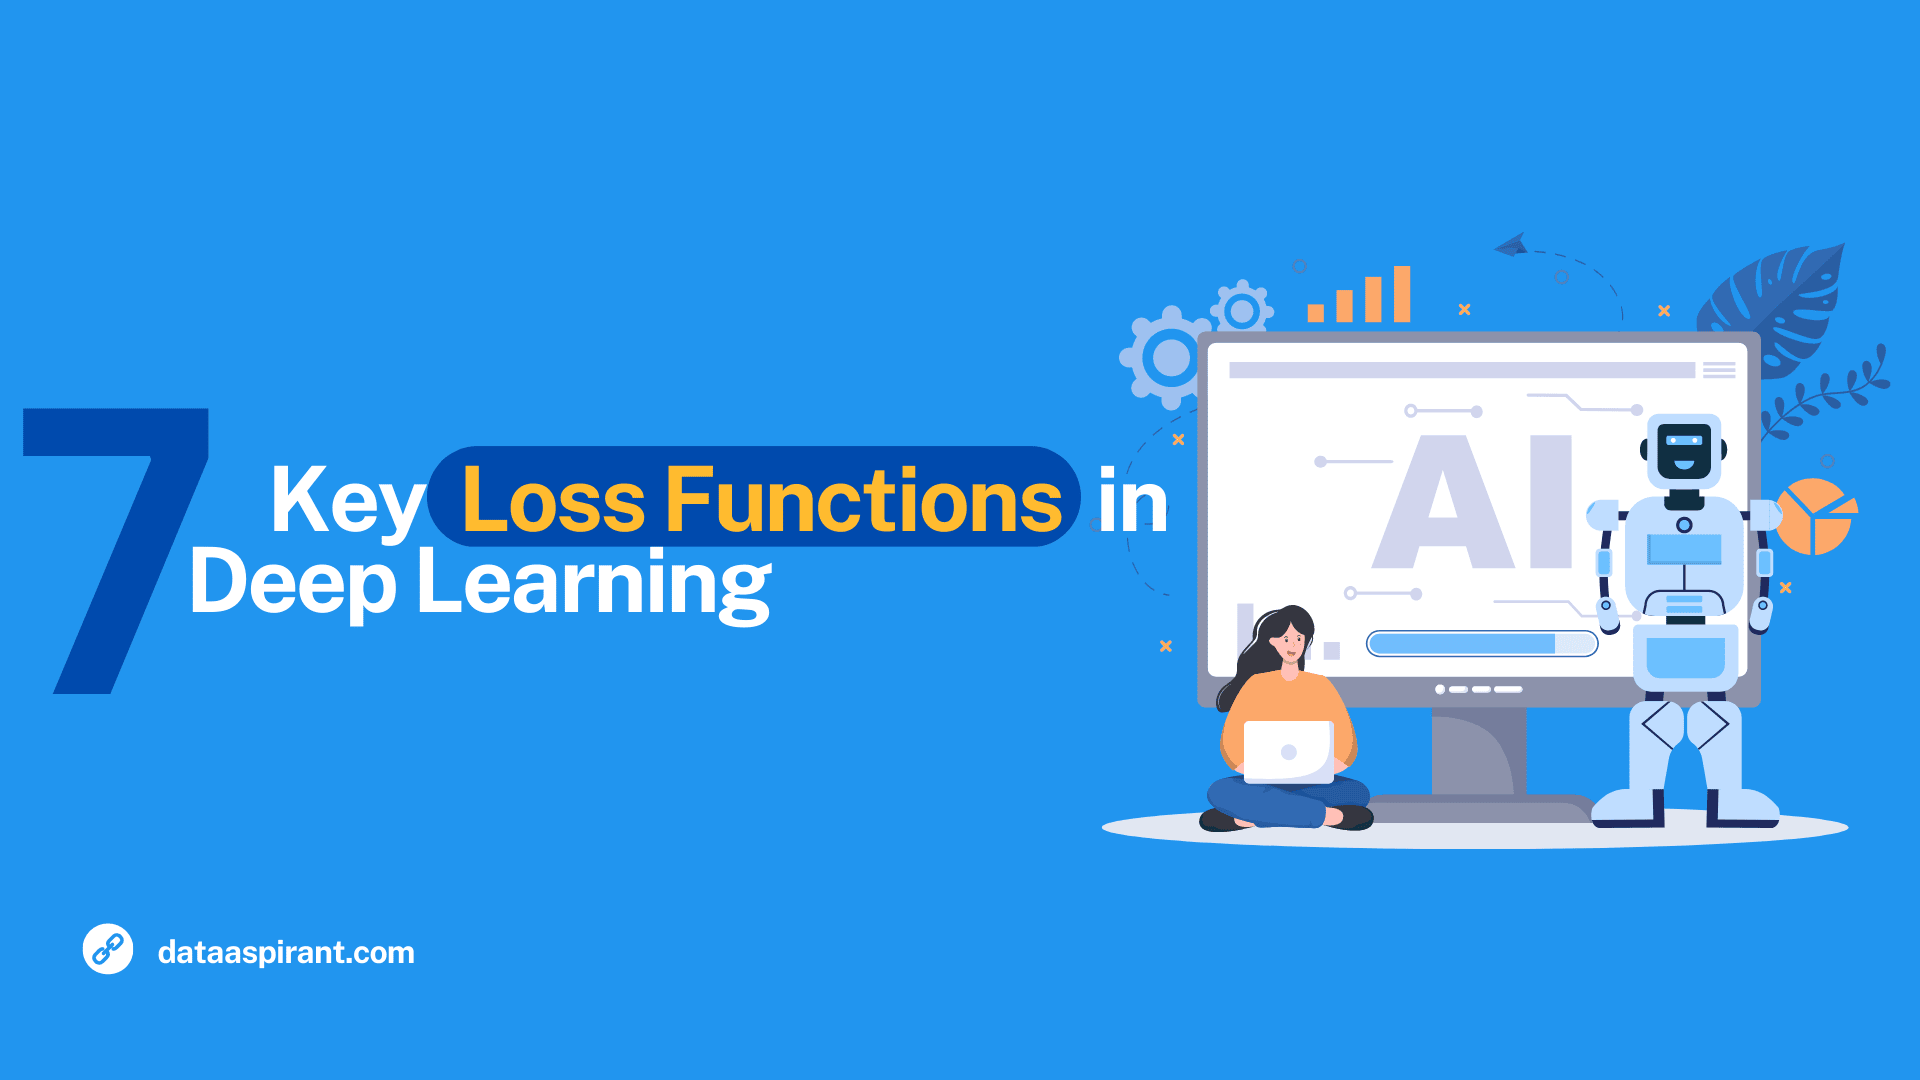 Loss Functions in Deep Learning